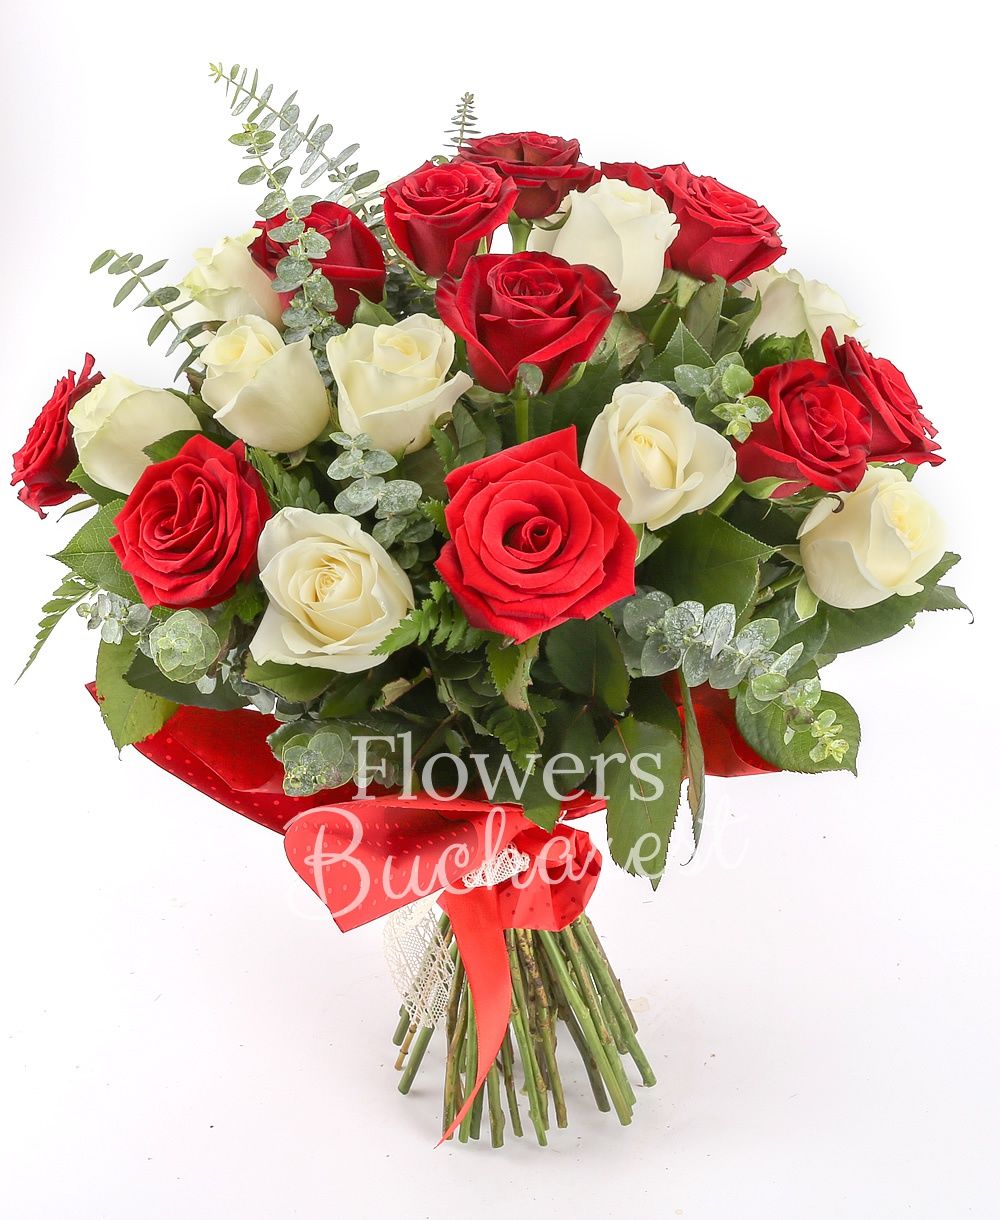 15 red roses, 14 white roses, greenery